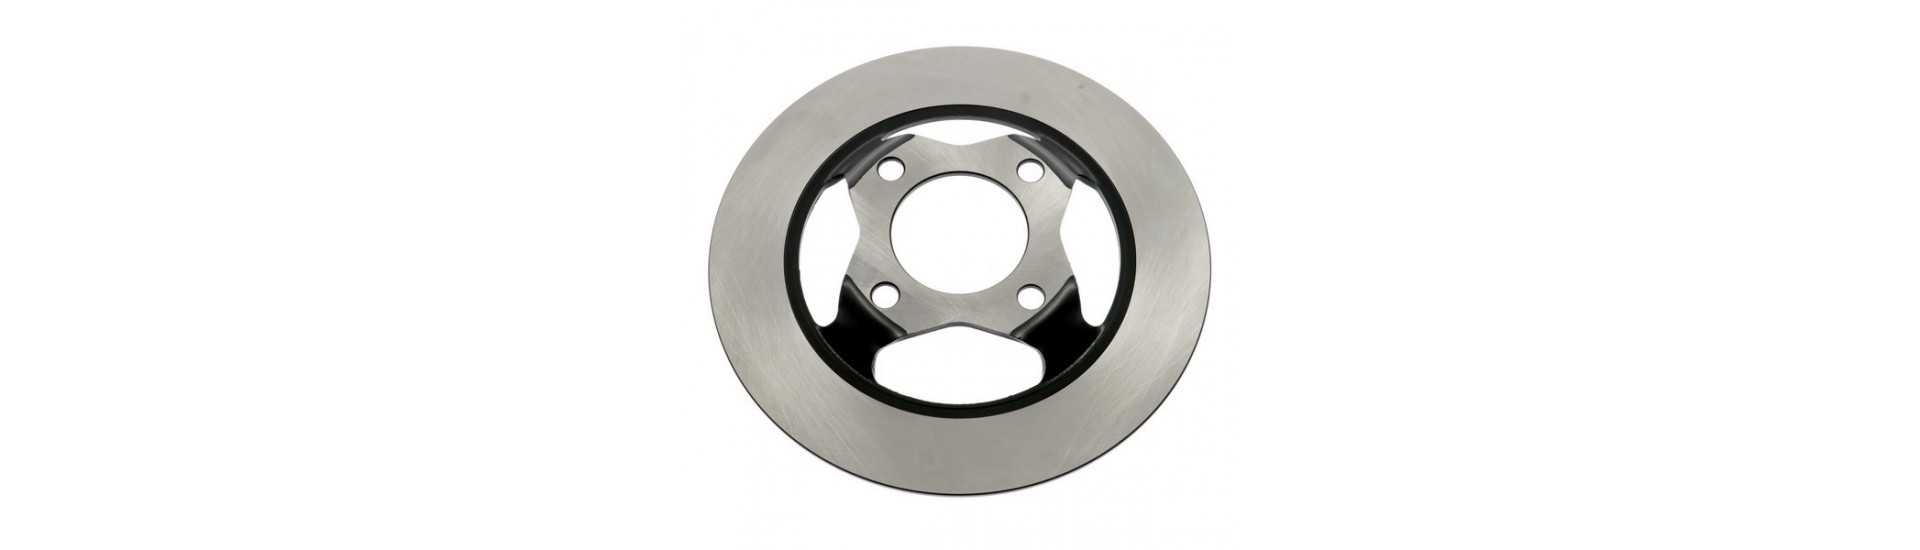 Best price brake disc for car without a permit